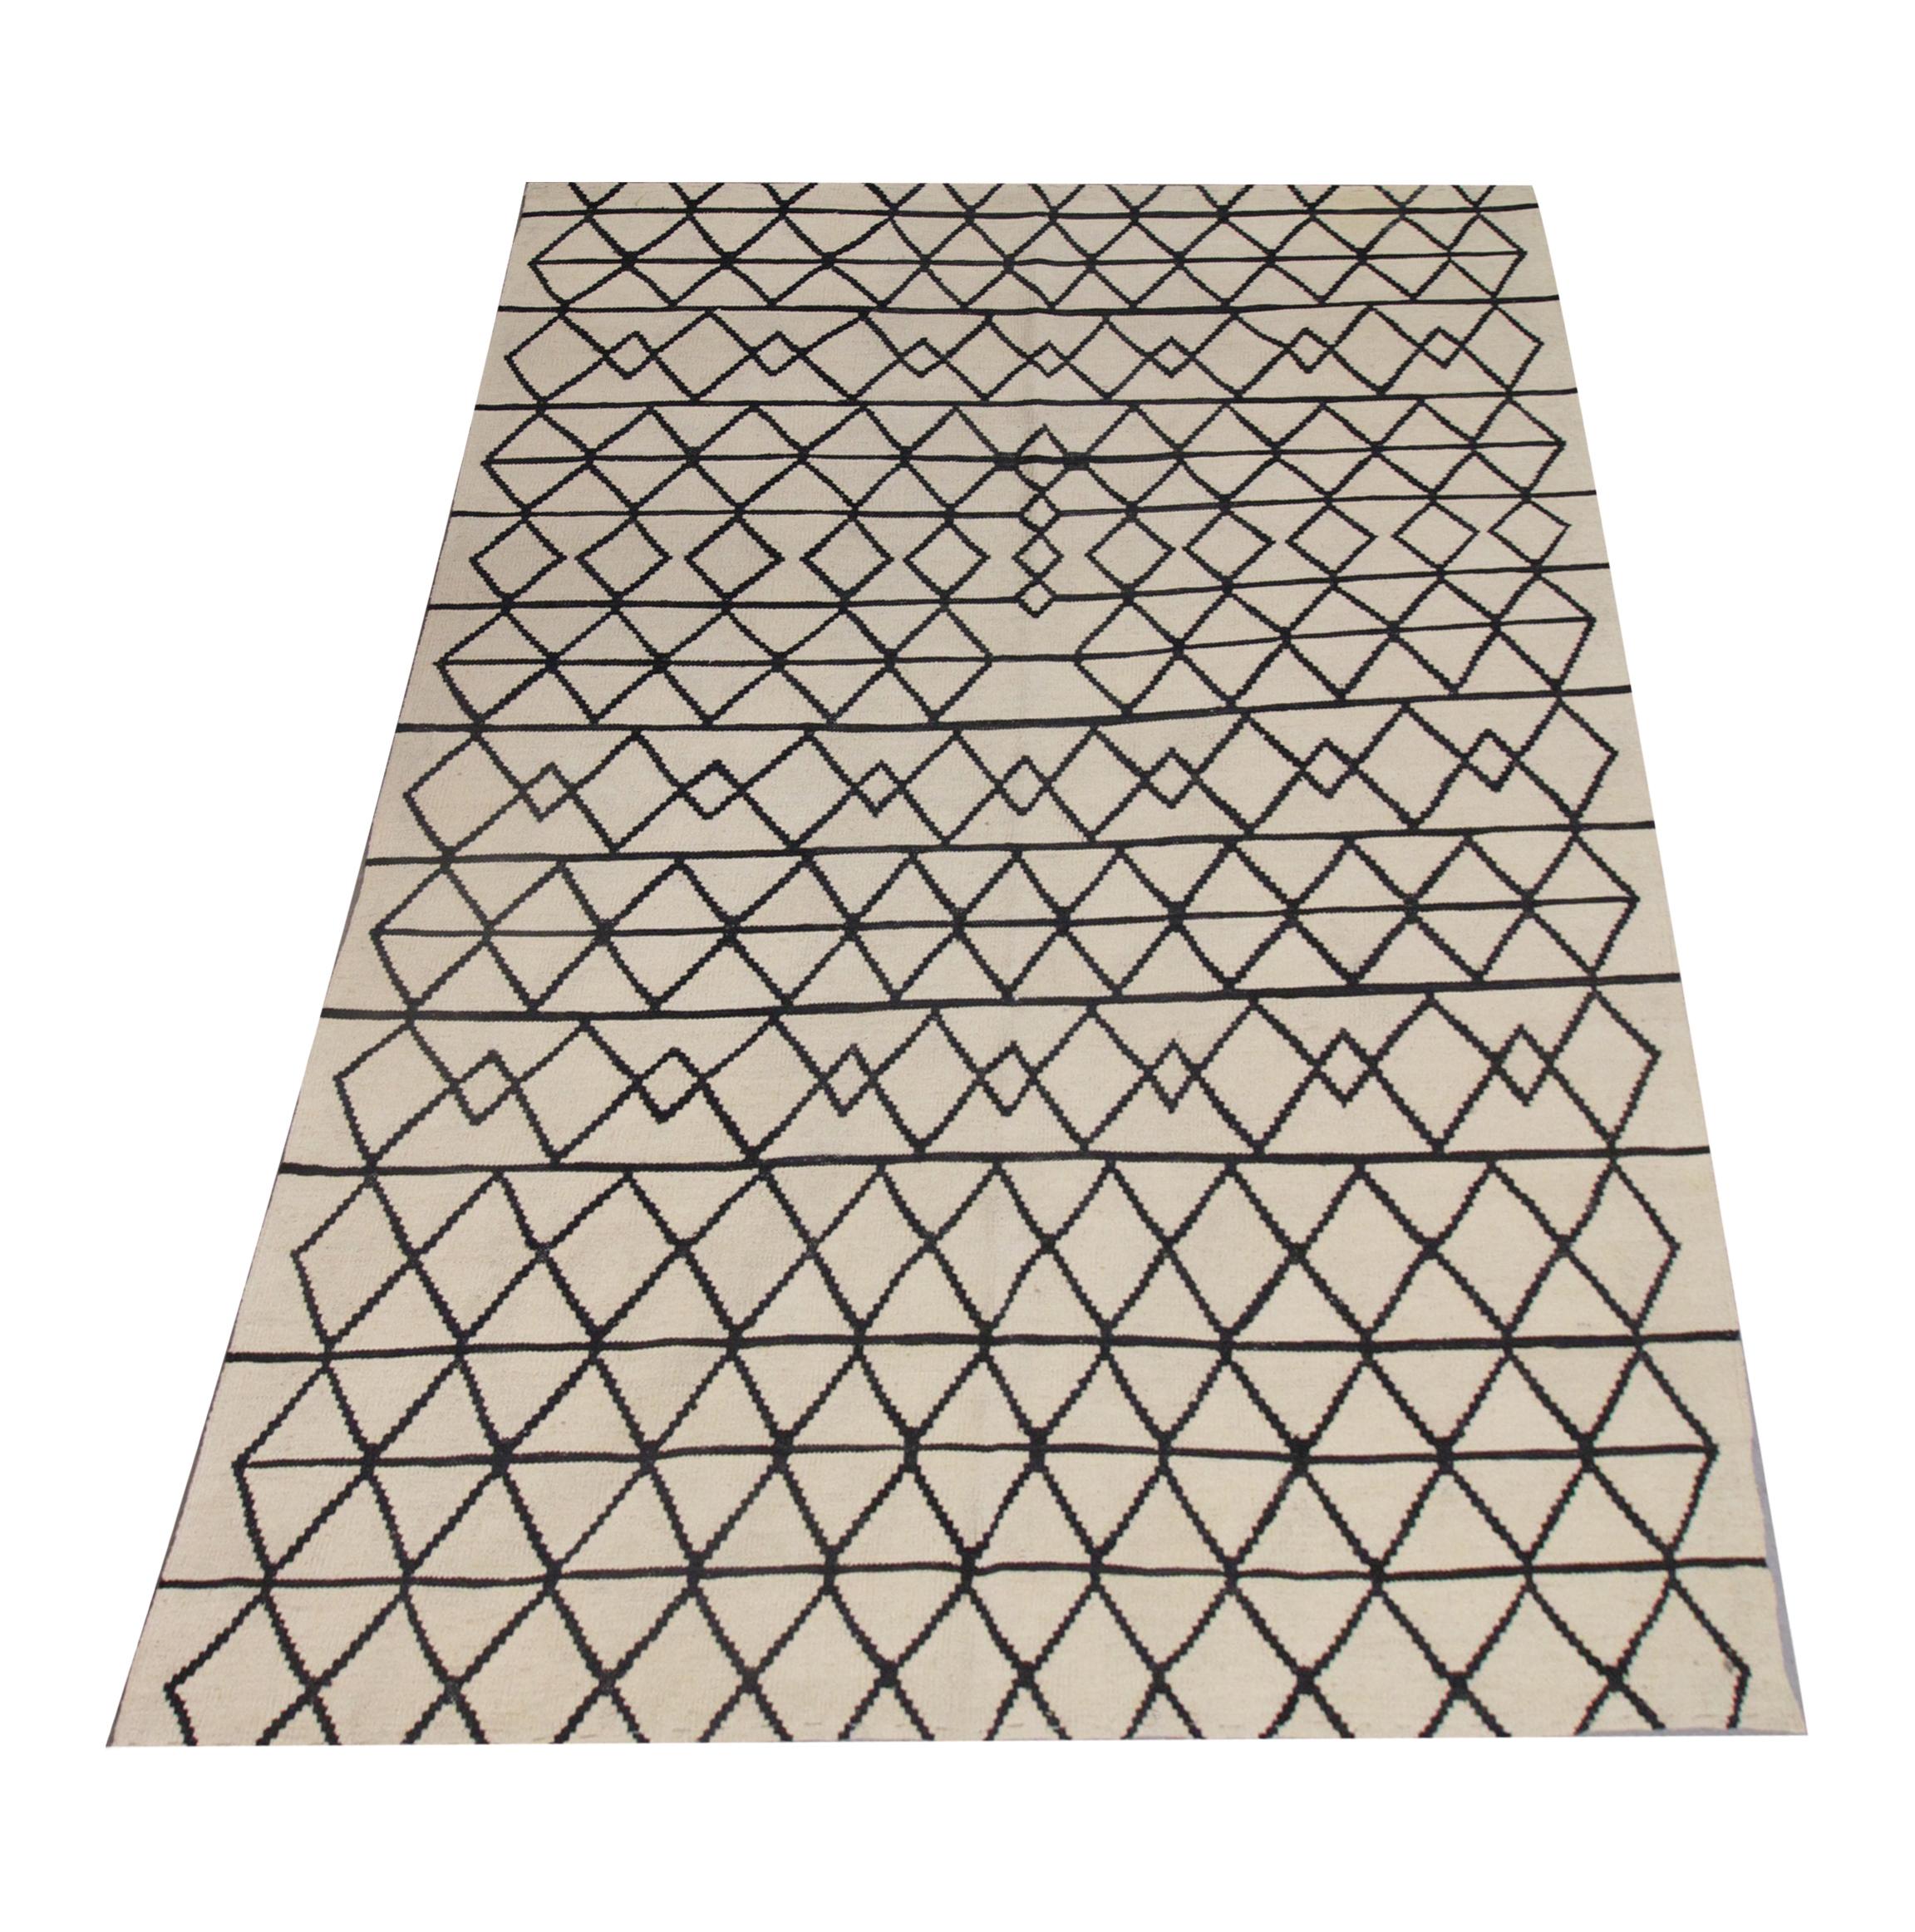 This bold wool area rug is a handwoven kilim constructed in Afghanistan in the early 2000s. The design has been woven with a simple cream background with a contrasting black linear design that makes up the repeating geometric diamond pattern,